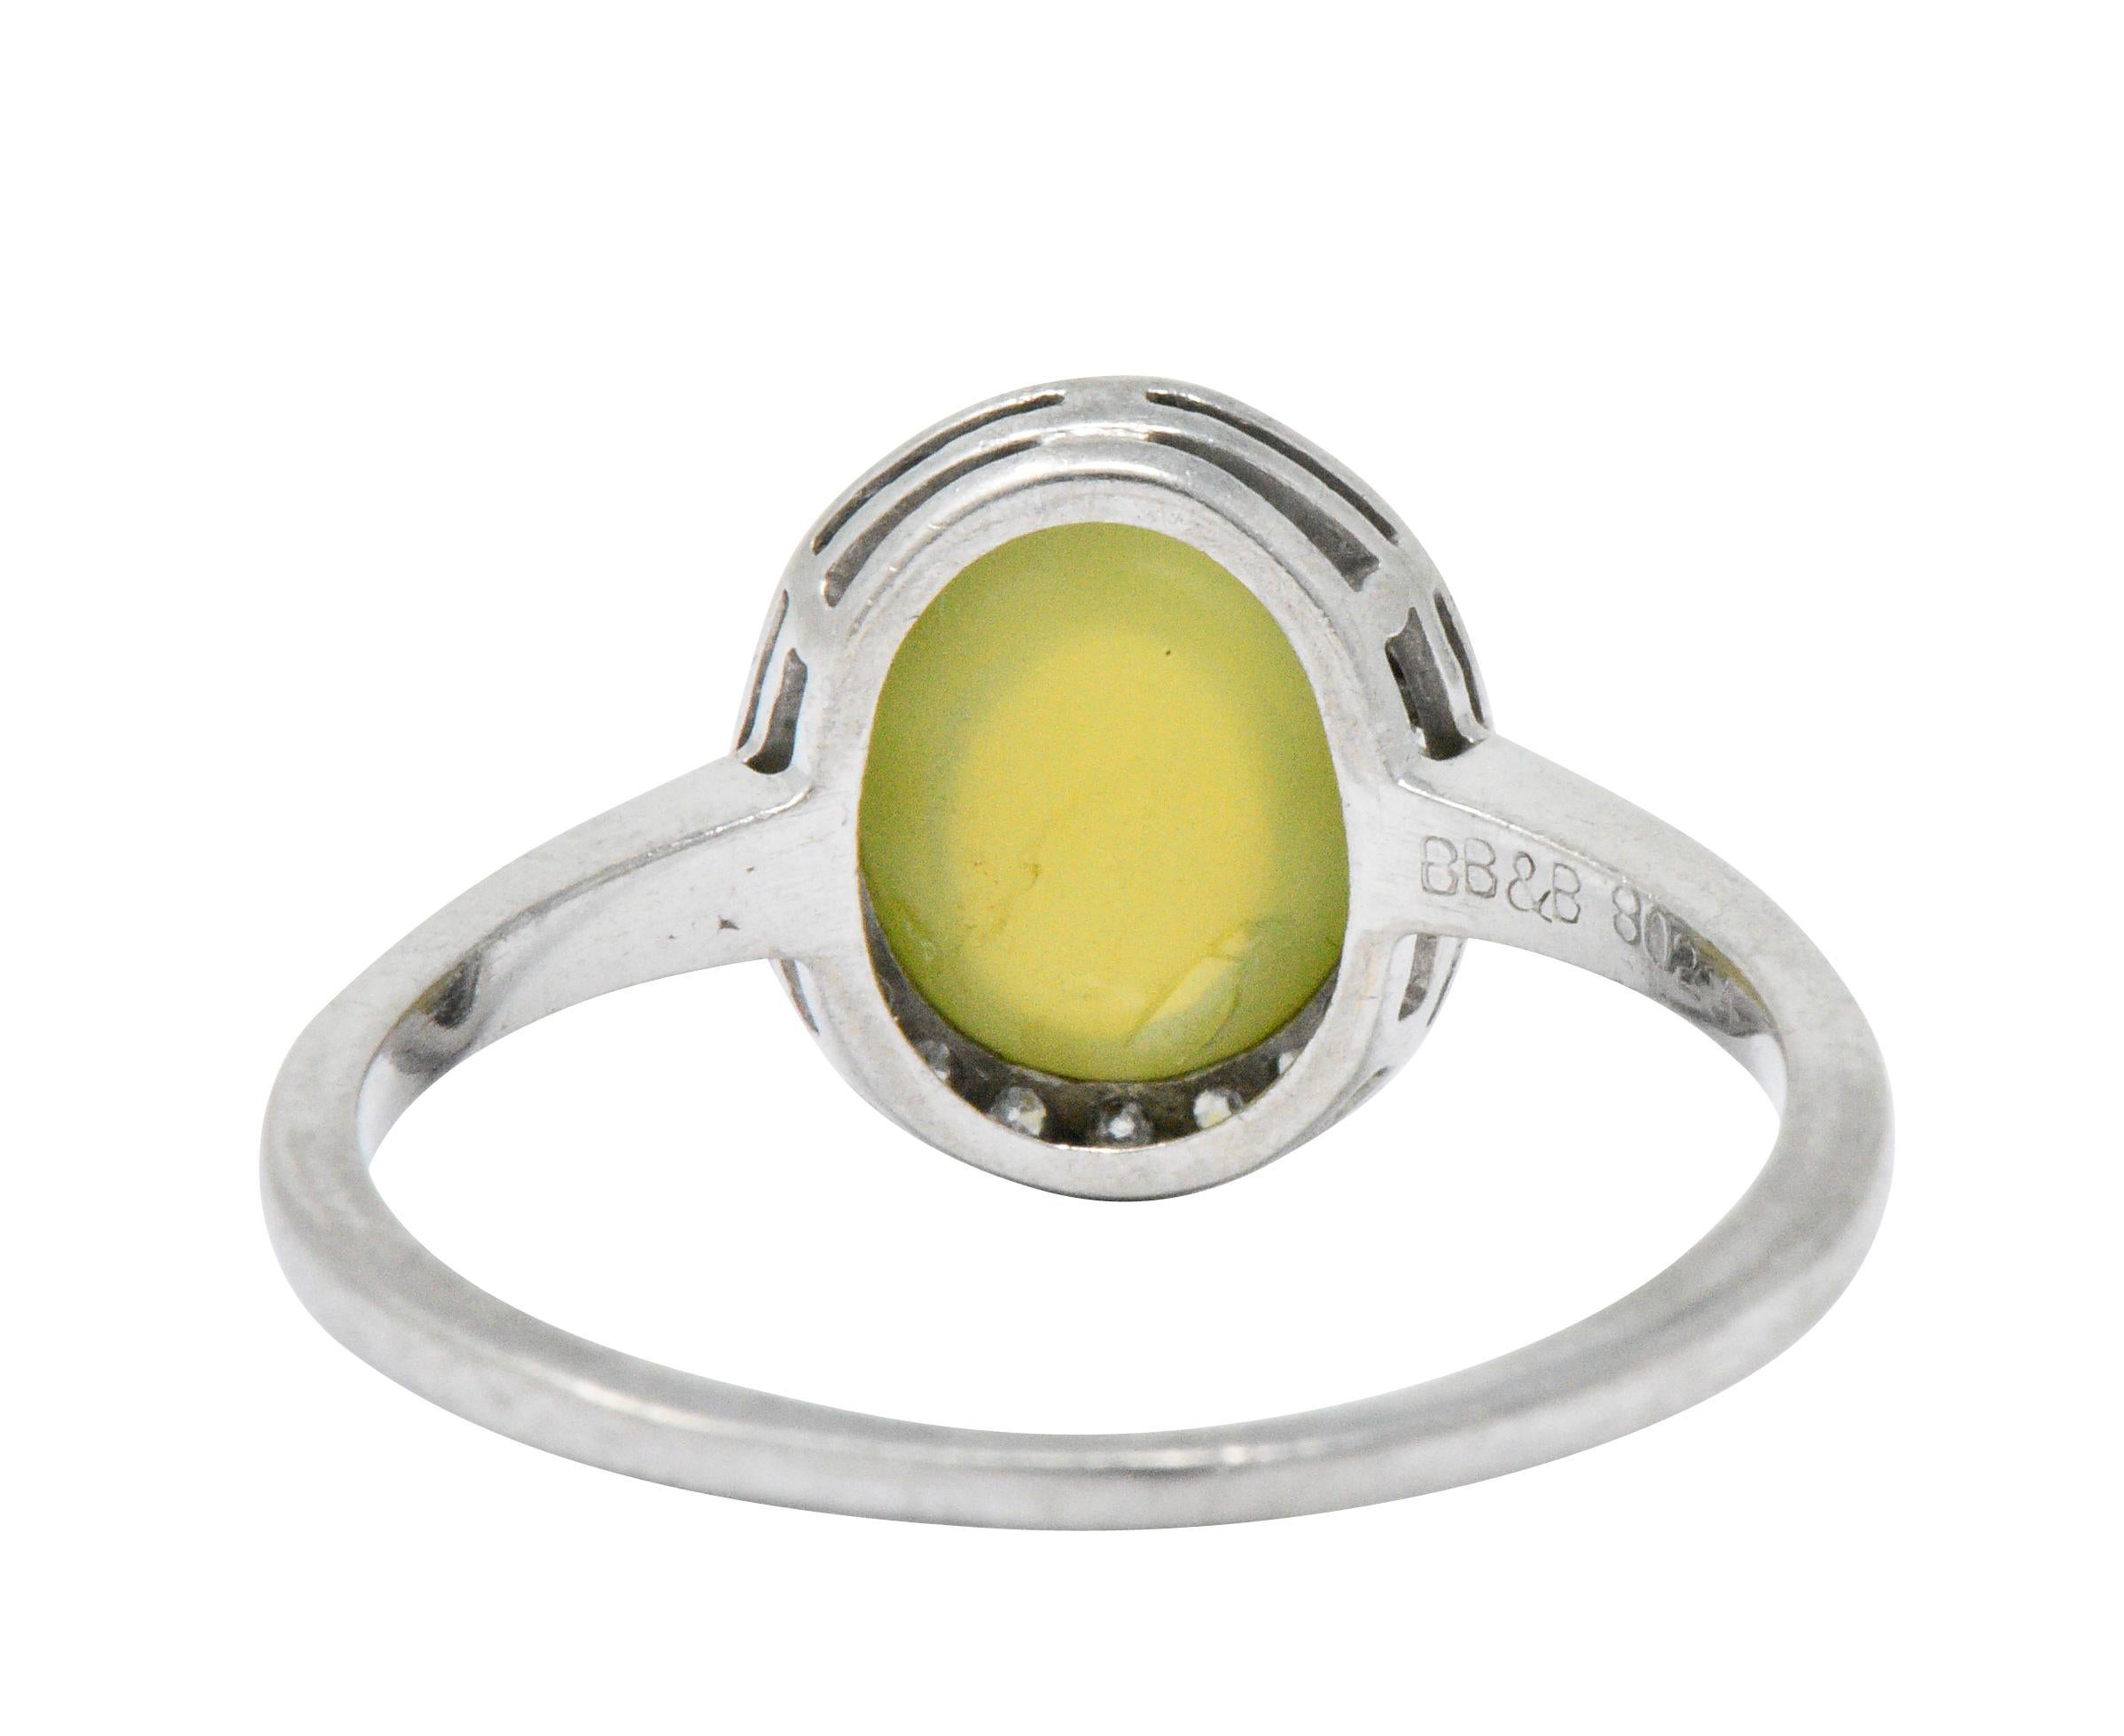 Bailey Banks & Biddle 2.30 Carats Cat’s Eye Chrysoberyl Diamond Platinum Ring In Excellent Condition In Philadelphia, PA